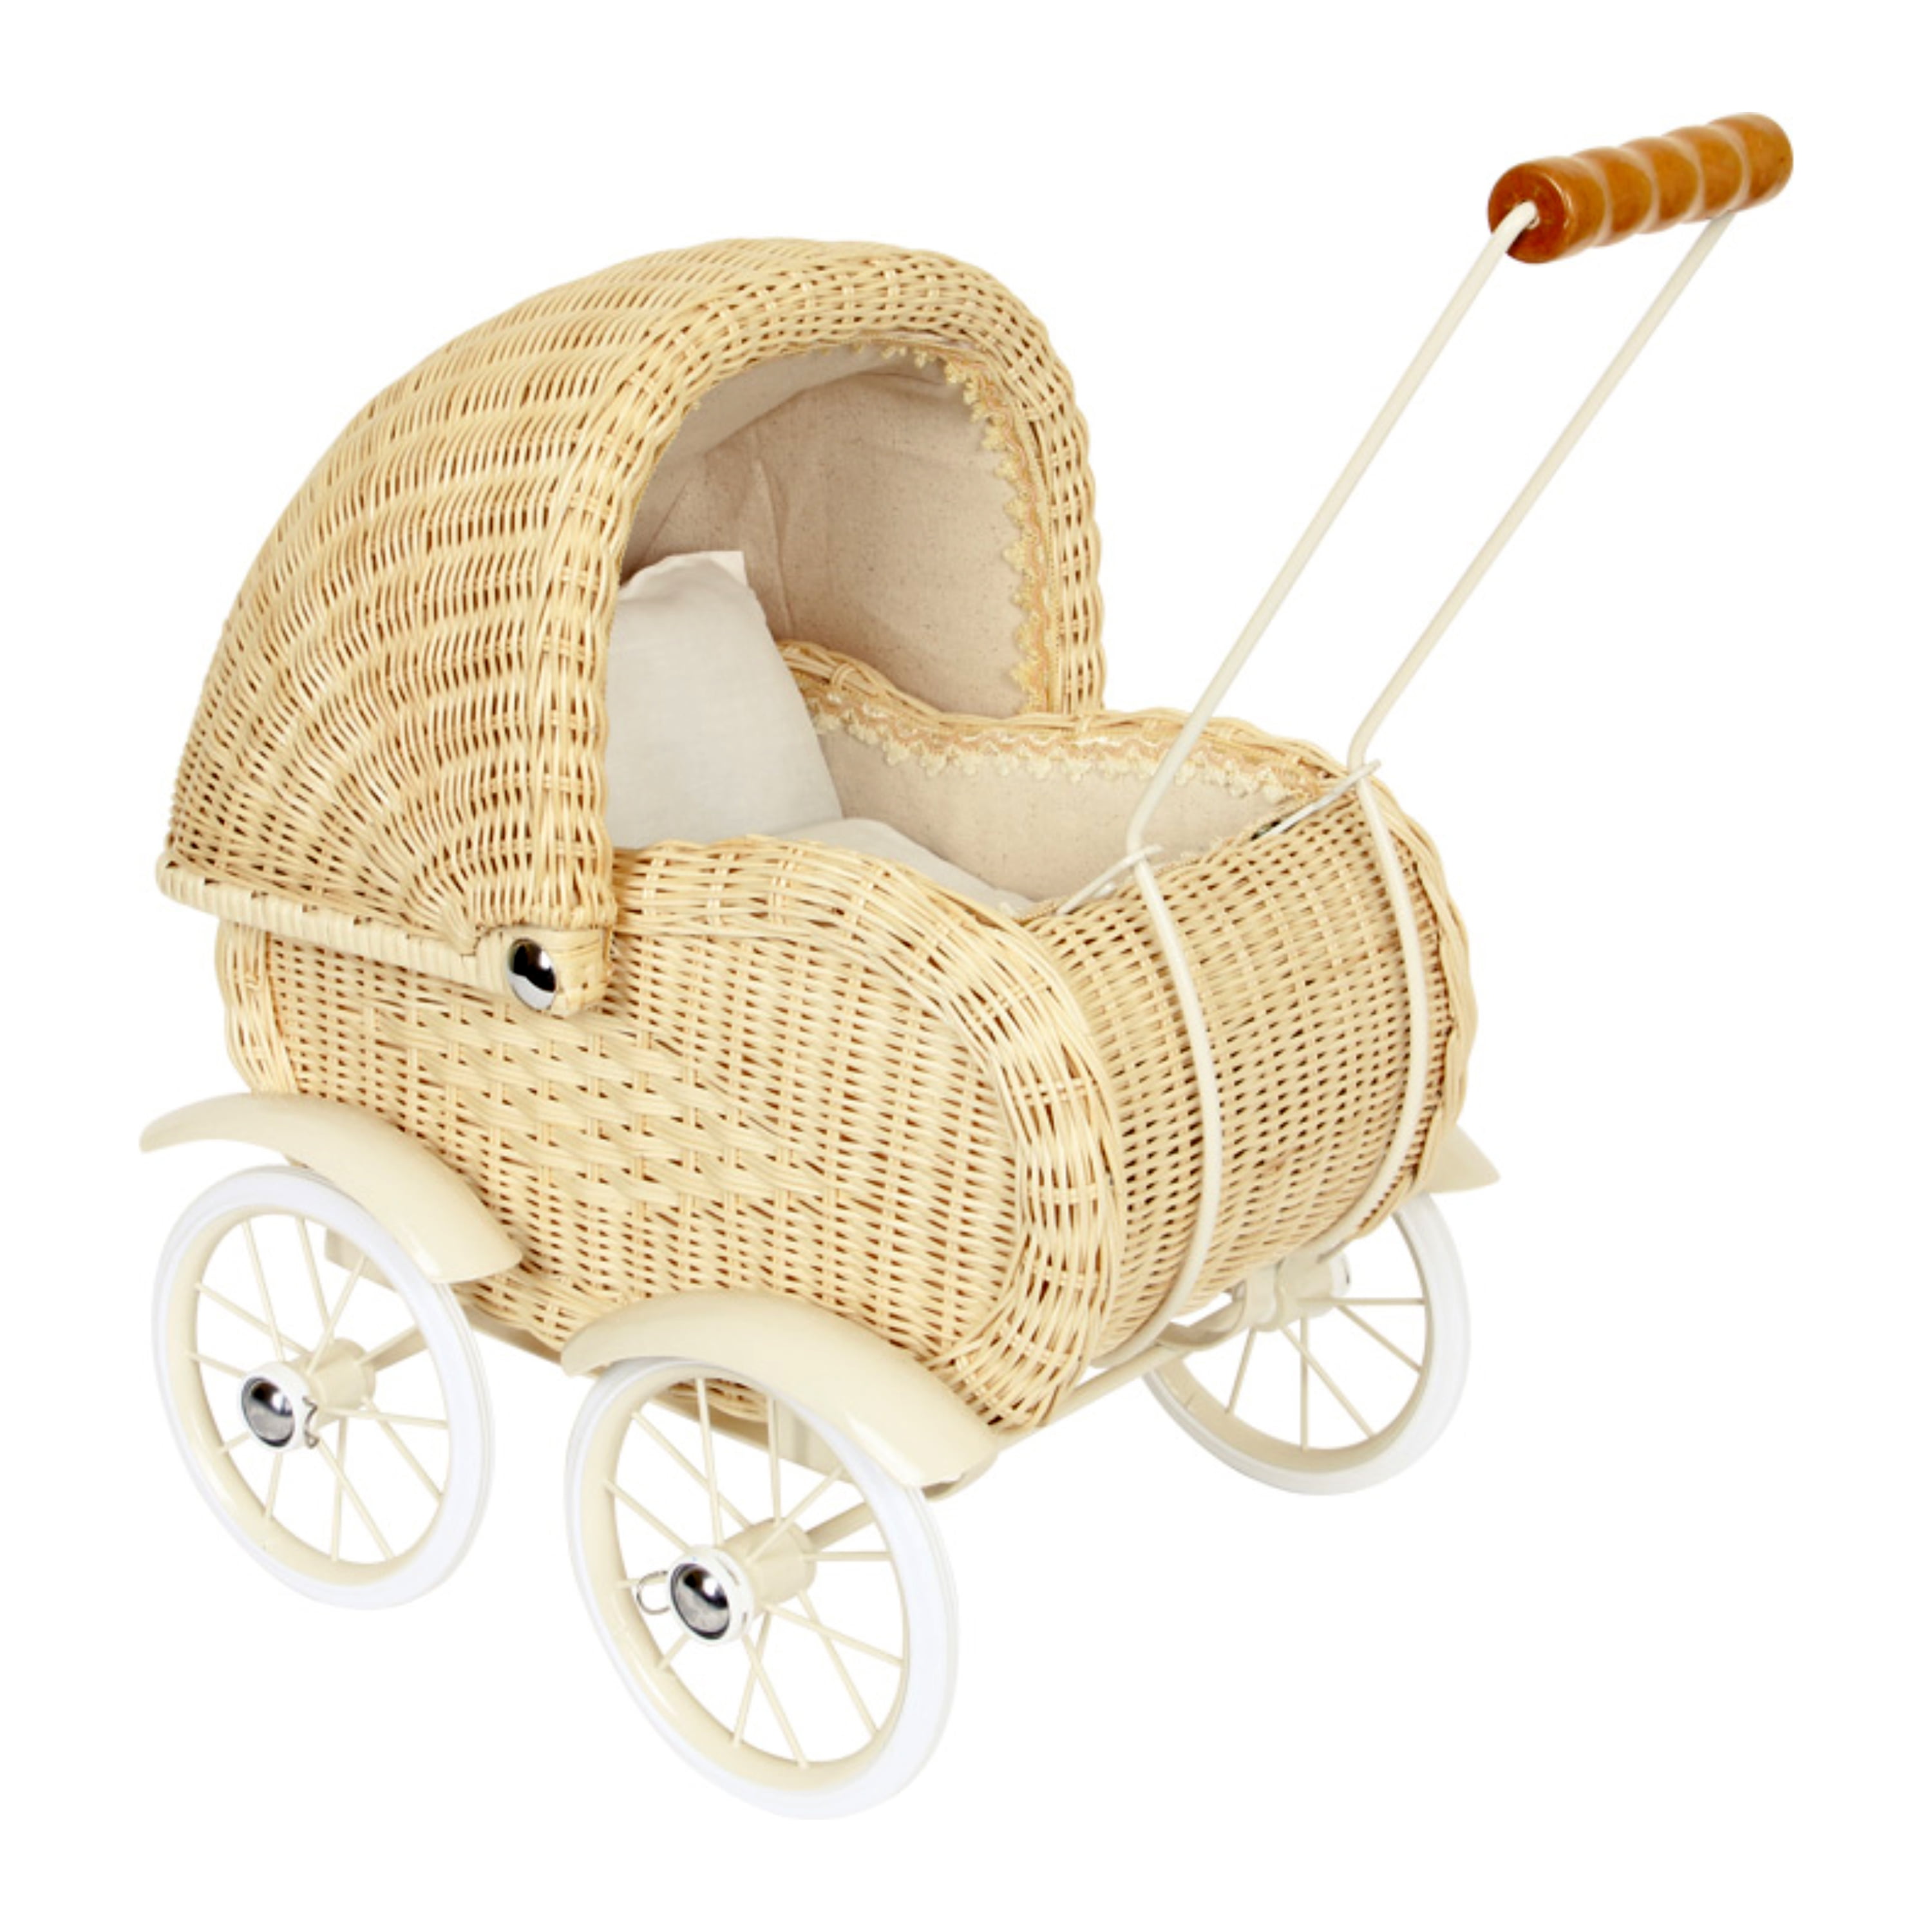 HAND-MADE  VINTAGE STYLE Wicker dolls pram in natural wicker color 